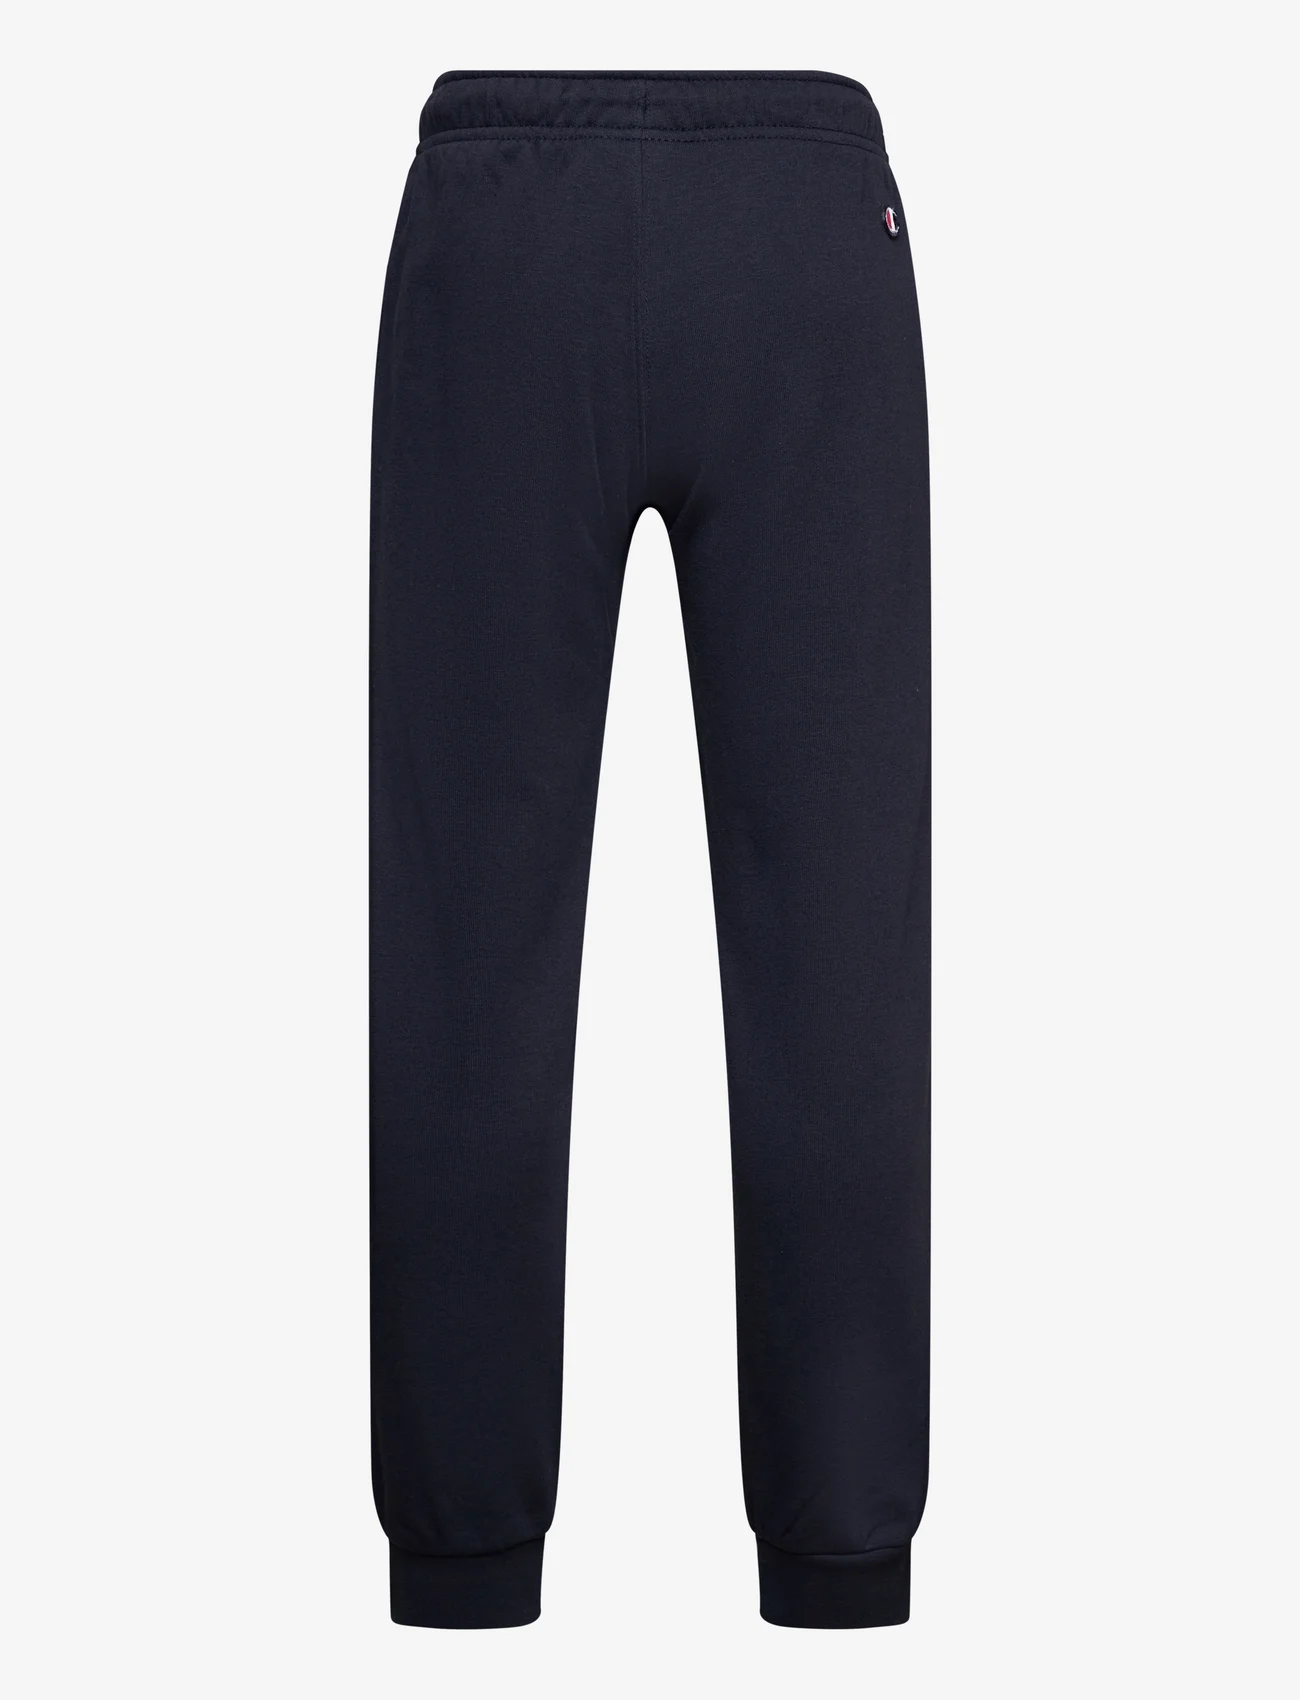 Champion - Rib Cuff Pants - lowest prices - sky captain - 1